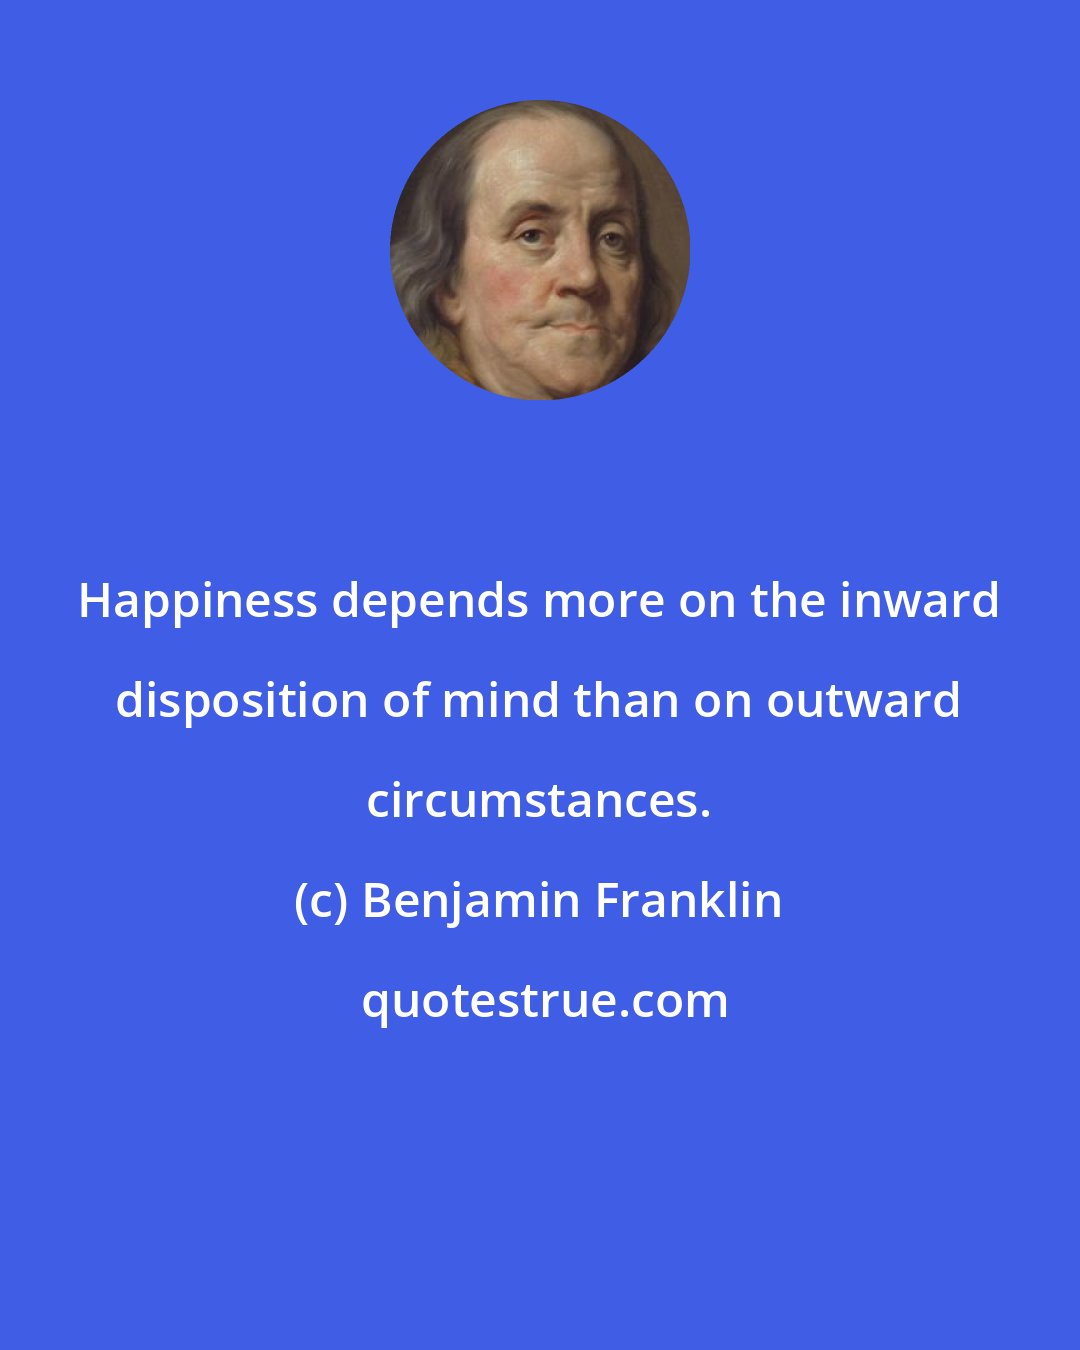 Benjamin Franklin: Happiness depends more on the inward disposition of mind than on outward circumstances.